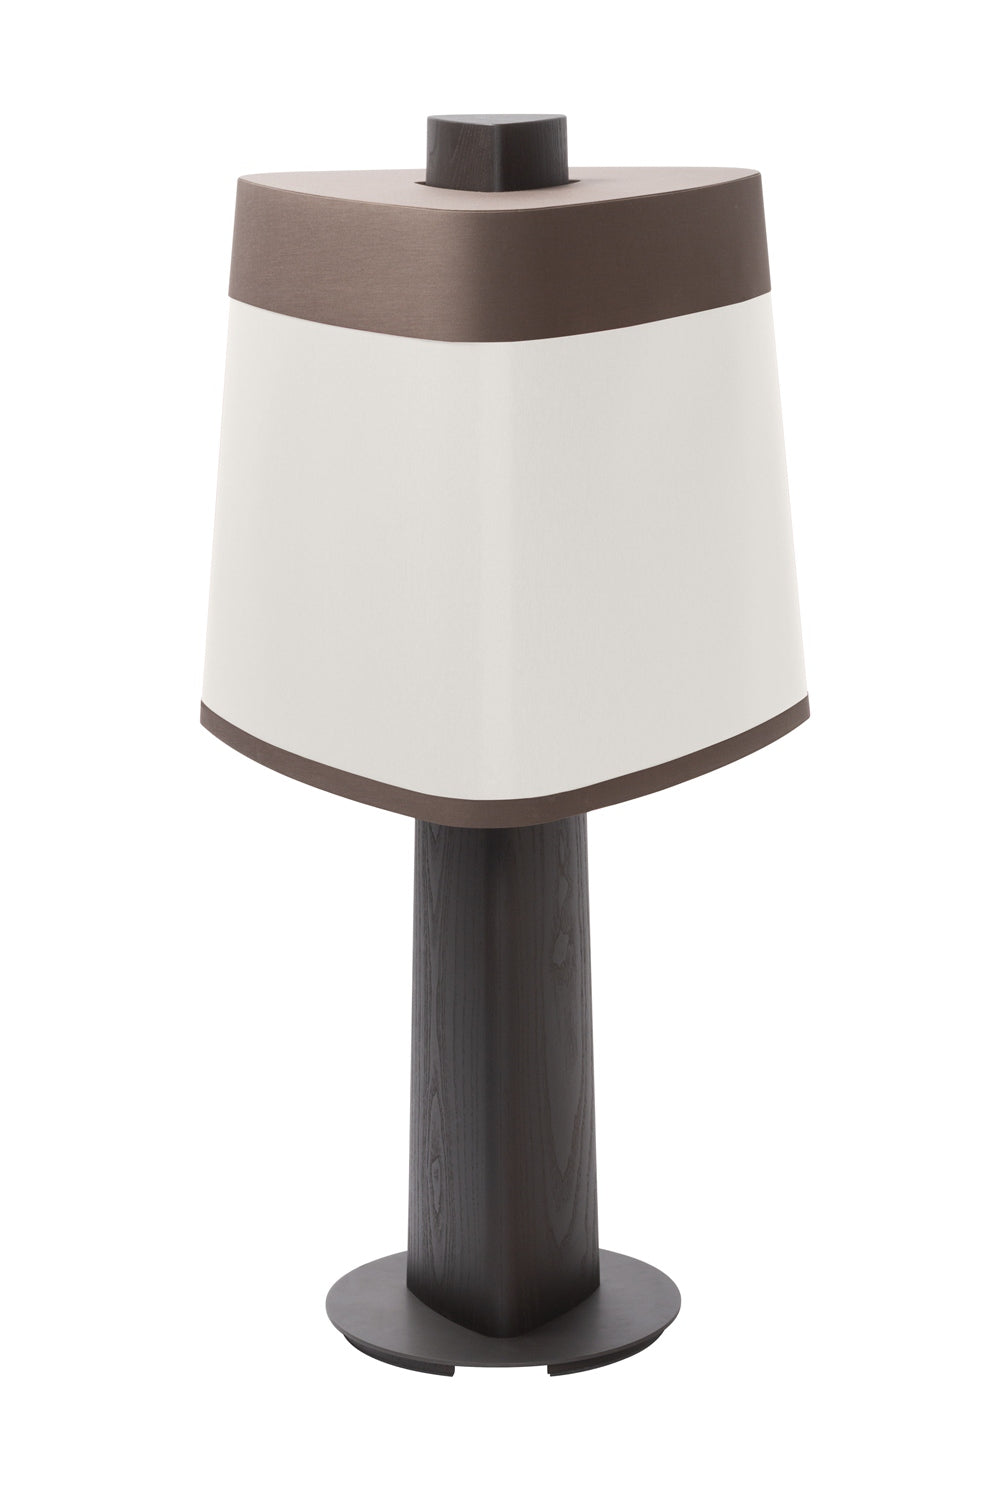 Giobagnara x Stéphane Parmentier Rockwell Floor Lamp | Elegant Wood Stem in Dark-Stained Canaletto Walnut or Wenge | Burnished Bronze Base for Stability | Fine Cotton White Lampshade | Available at 2Jour Concierge, #1 luxury high-end gift & lifestyle shop